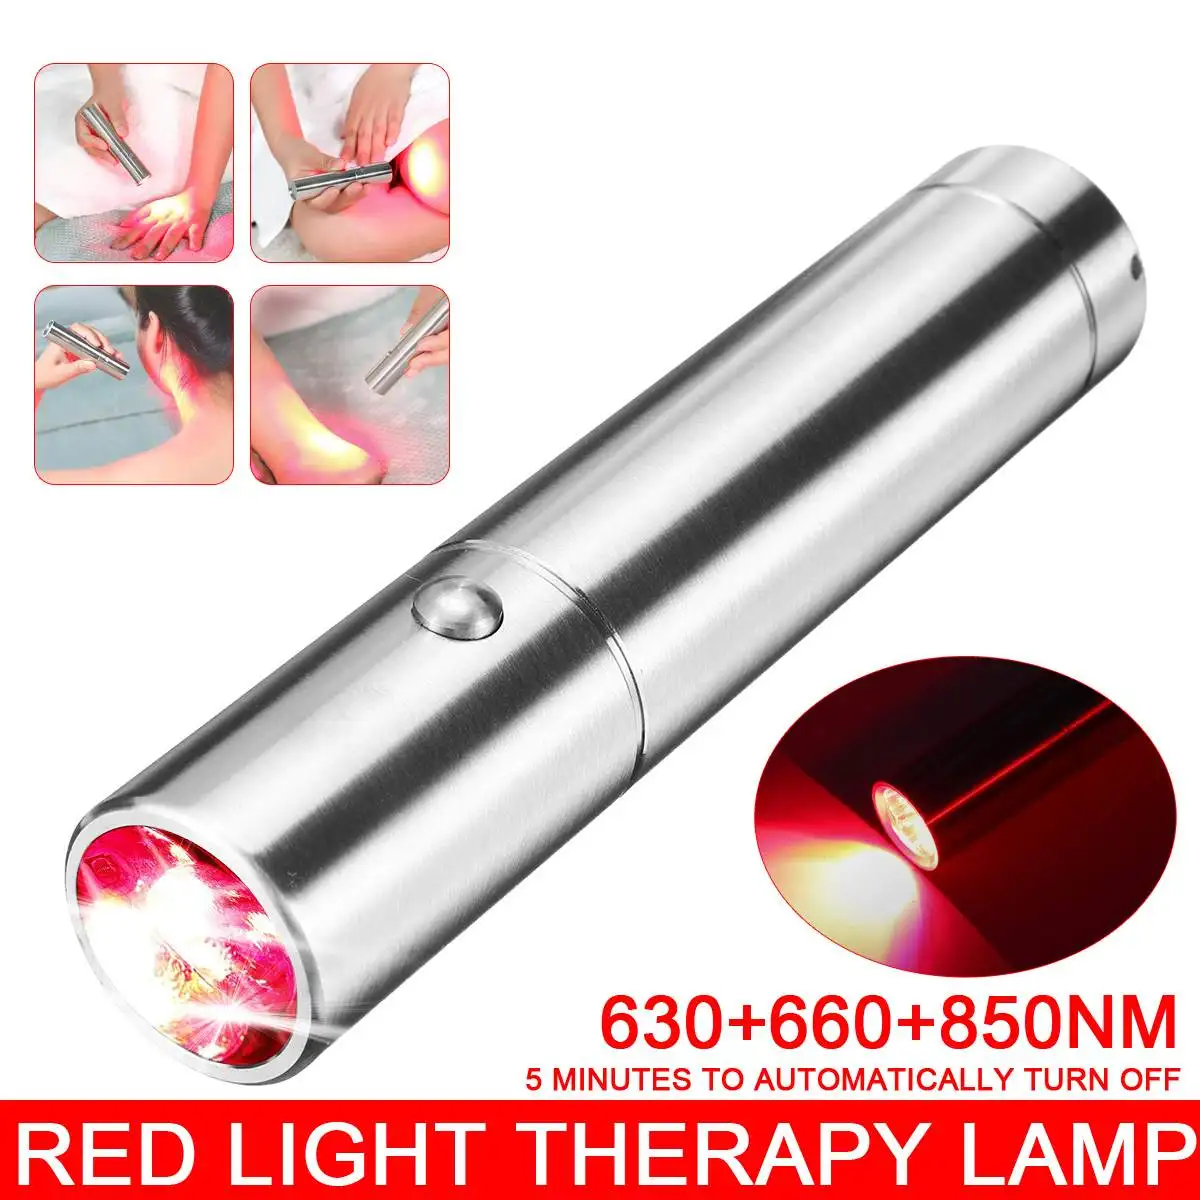 

Joint Pain Portable Led Near Infrared Infra 850nm Handheld Medical Lamp 630nm 660nm Red Light Therapy torch Therapy Lamp